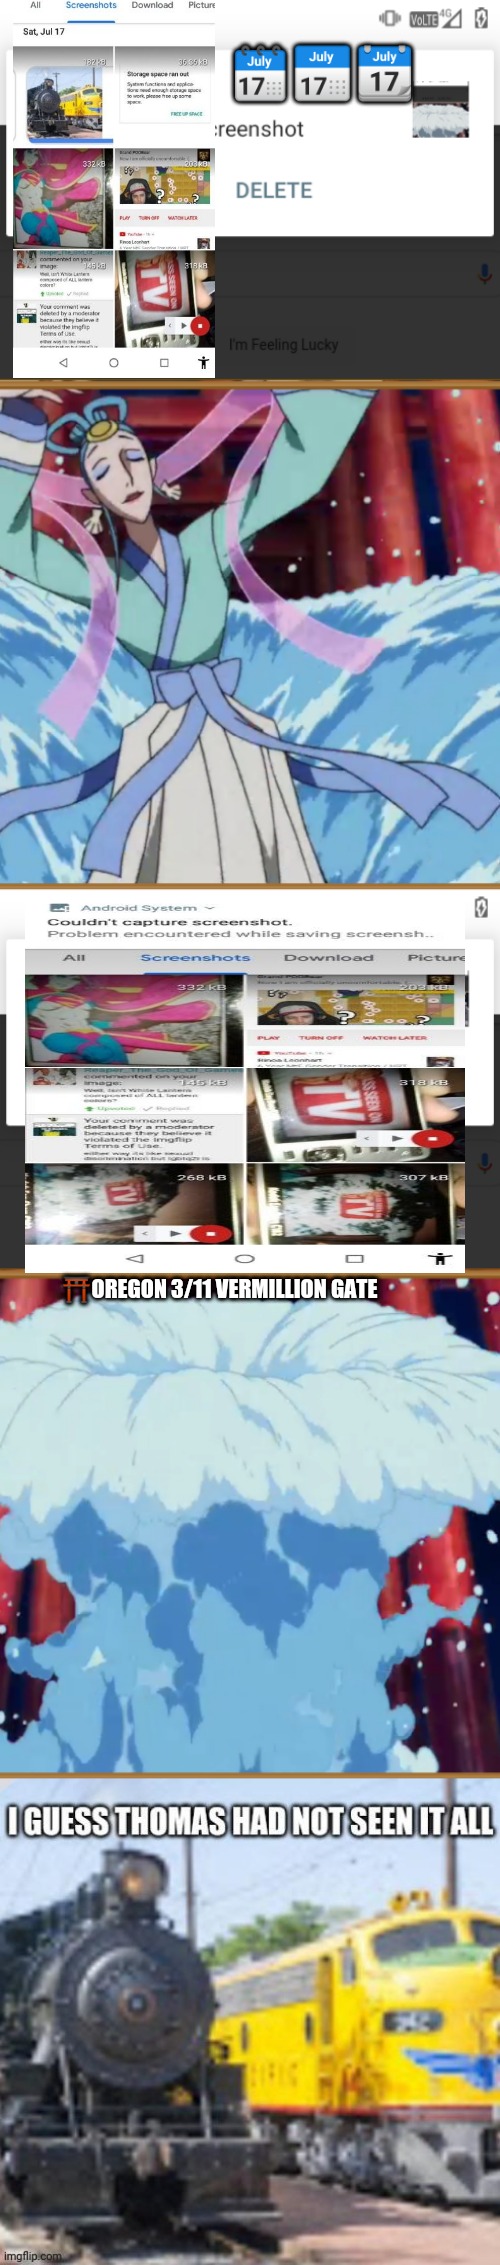 google doodle game | 🗓️📅📆; ⛩️OREGON 3/11 VERMILLION GATE | image tagged in google,google image upload,search,doodle,scribblenauts,pyschonauts xbox | made w/ Imgflip meme maker